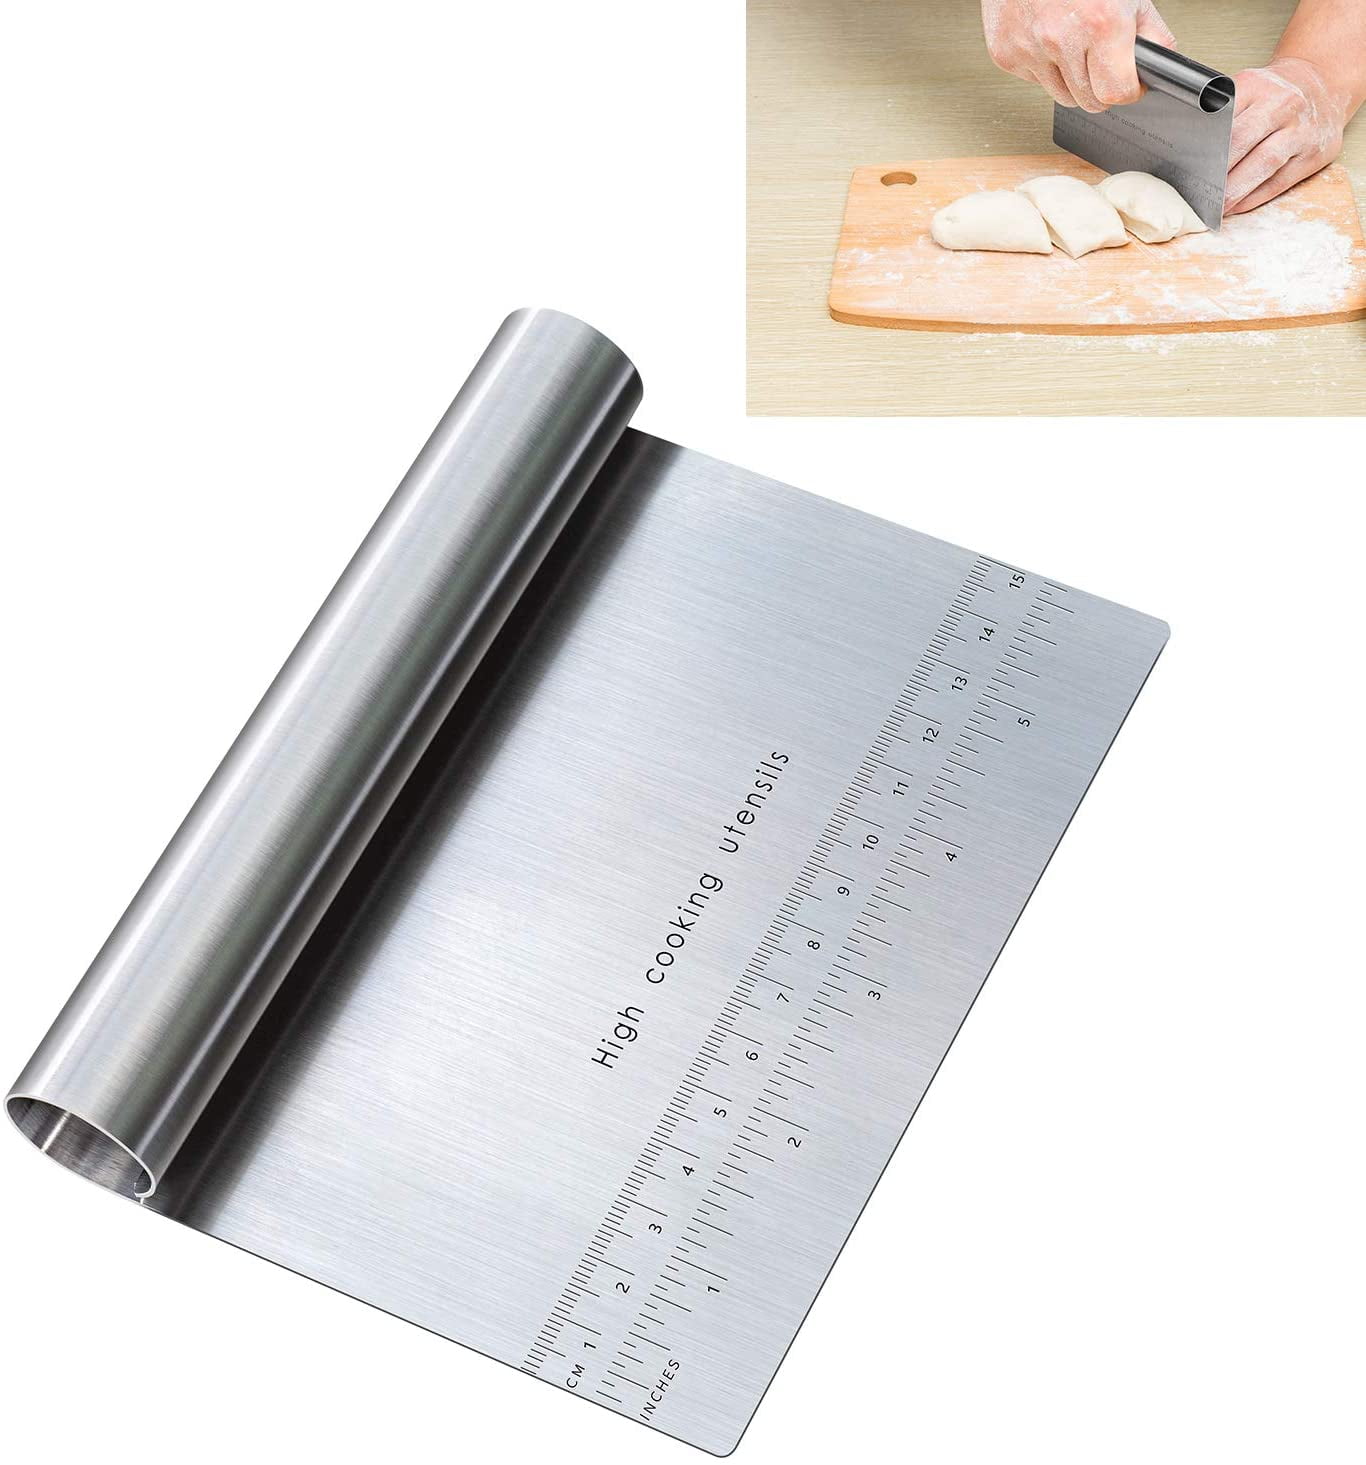 Stainless Steel Pastry Bench Scraper & Dough Cutter - Last Confection, 4.8  x 1 - Fry's Food Stores